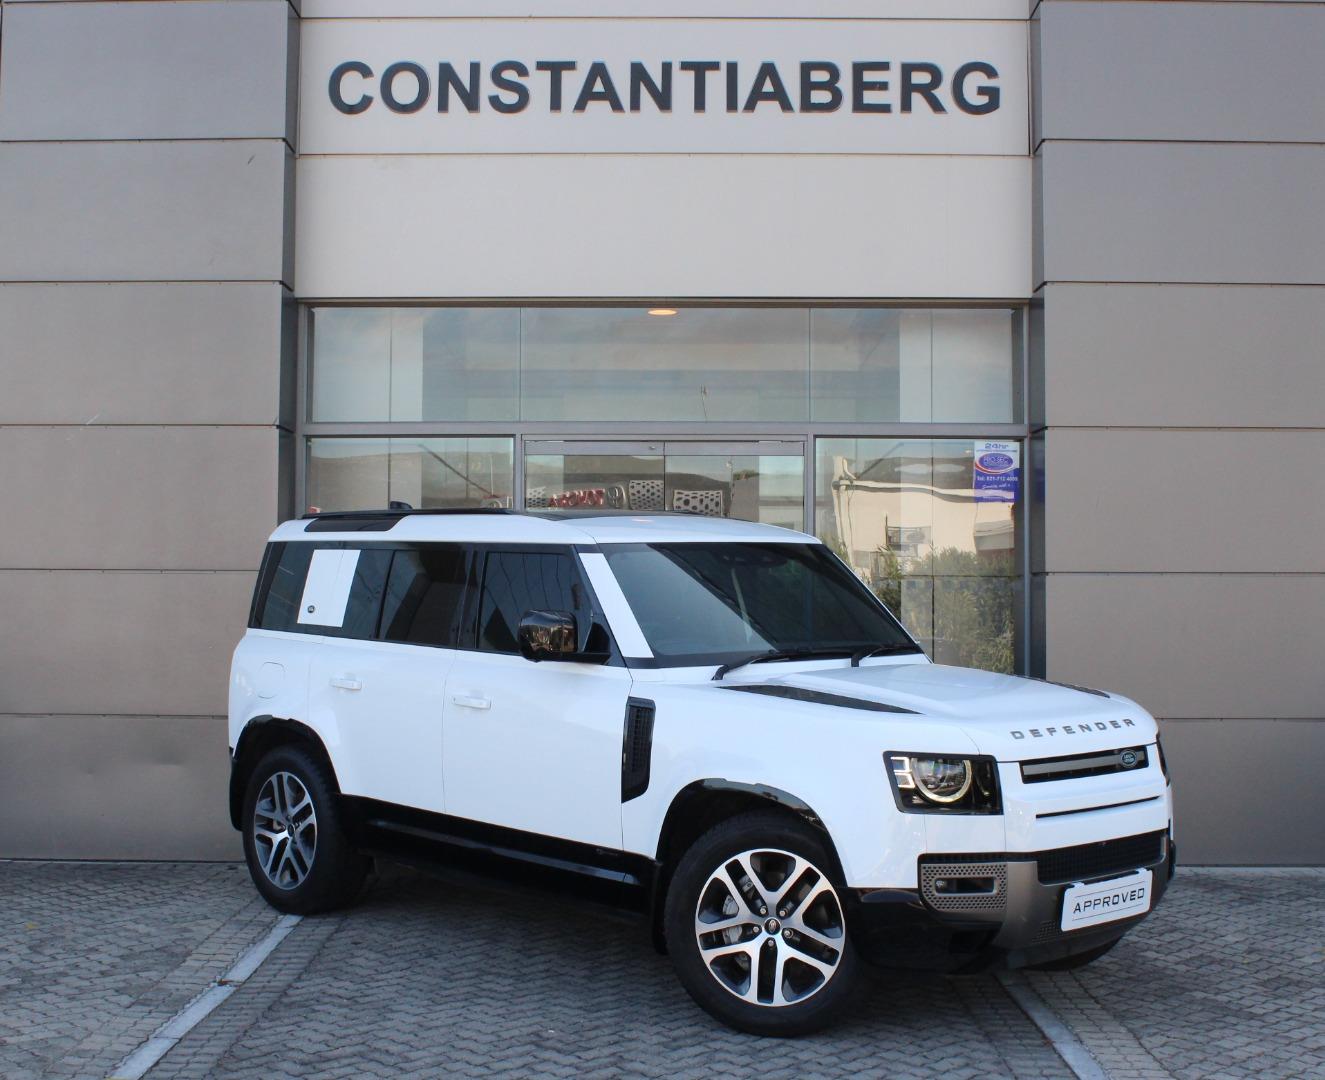 2021 Land Rover Defender  for sale - SMG11|USED|502583